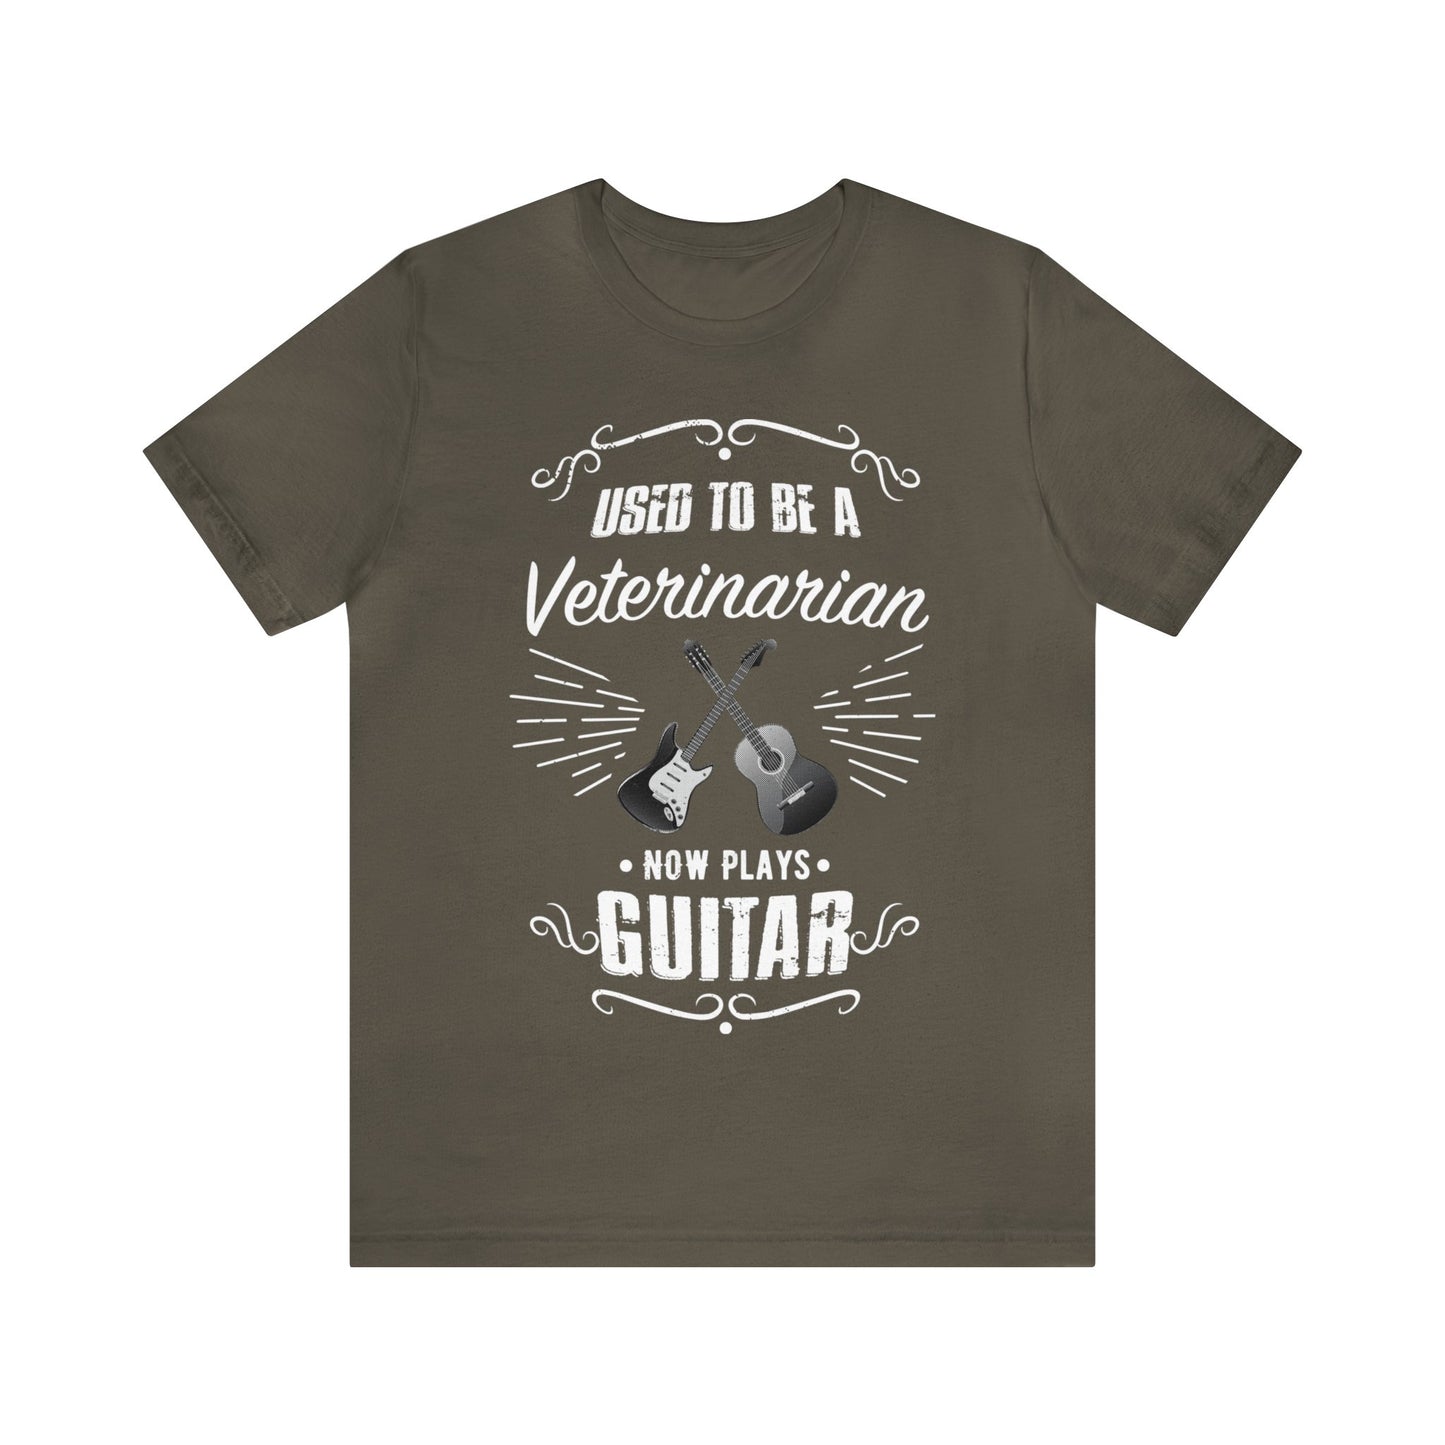 Used to be a VETERINARIAN; Now Plays GUITAR - Funny Retirement Gift, Unisex T-shirt Bella+Canvas 3001, dark colors for amateur musician/guitar player